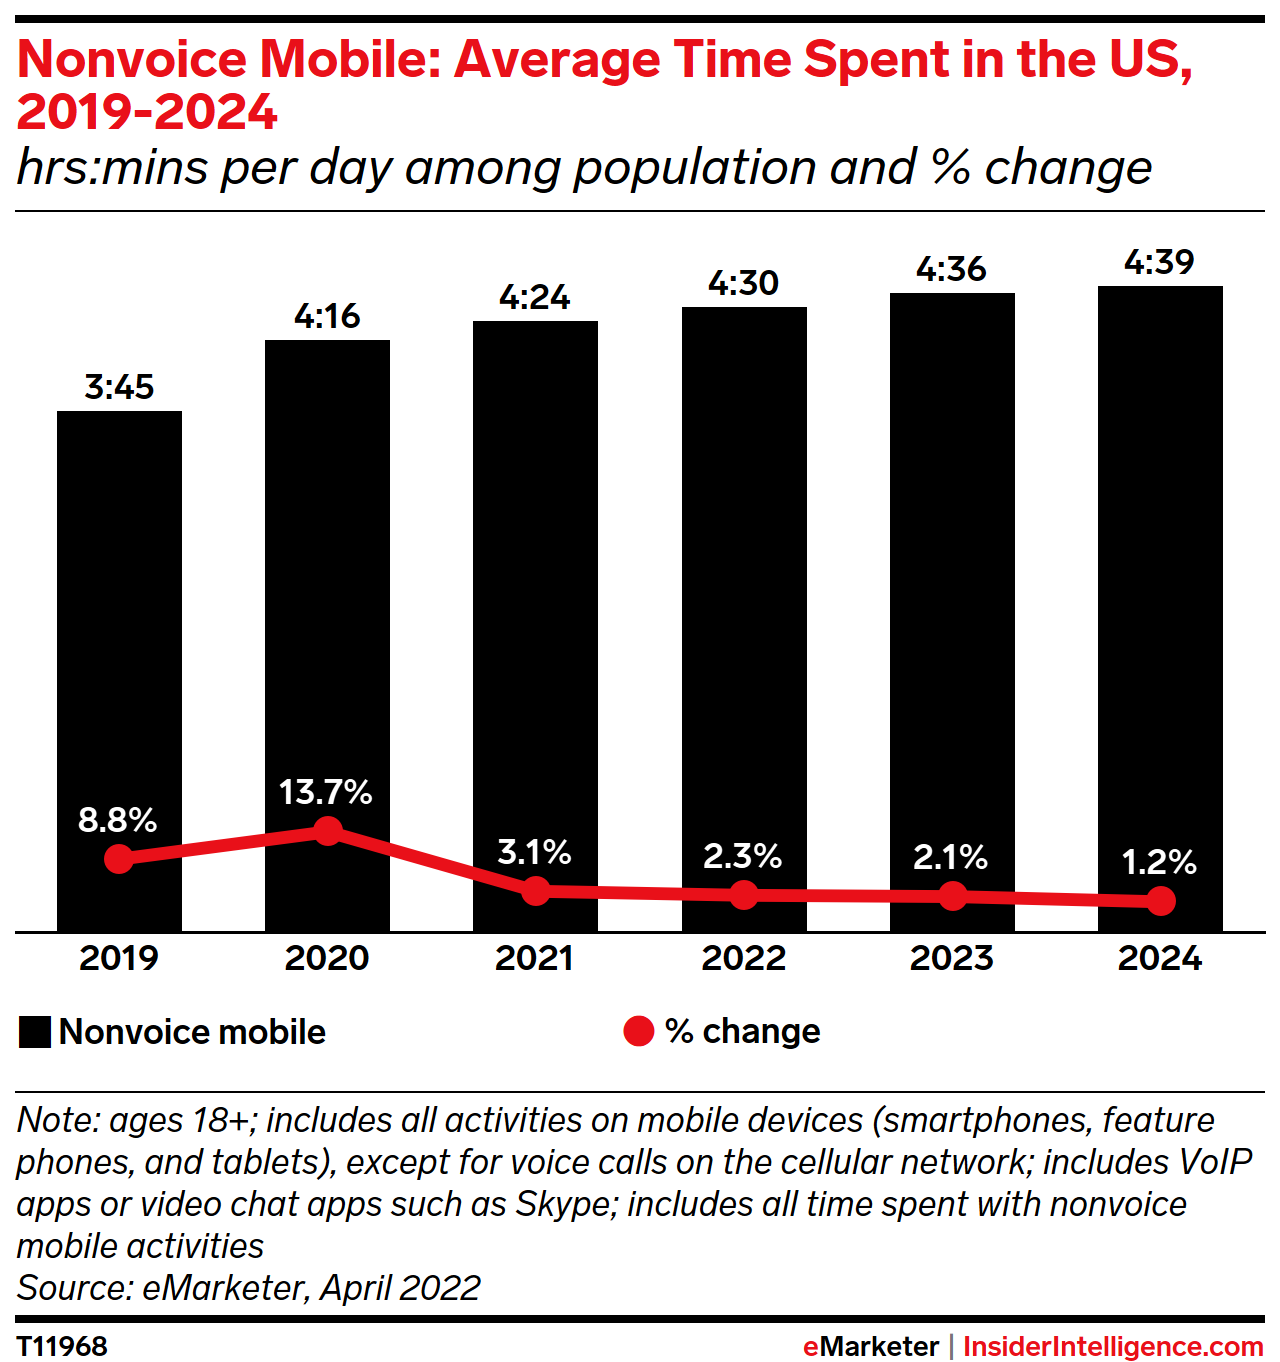 Nonvoice Mobile: Average Time Spent in the US, 2019-2024 (hrs:mins per day among population and % change)